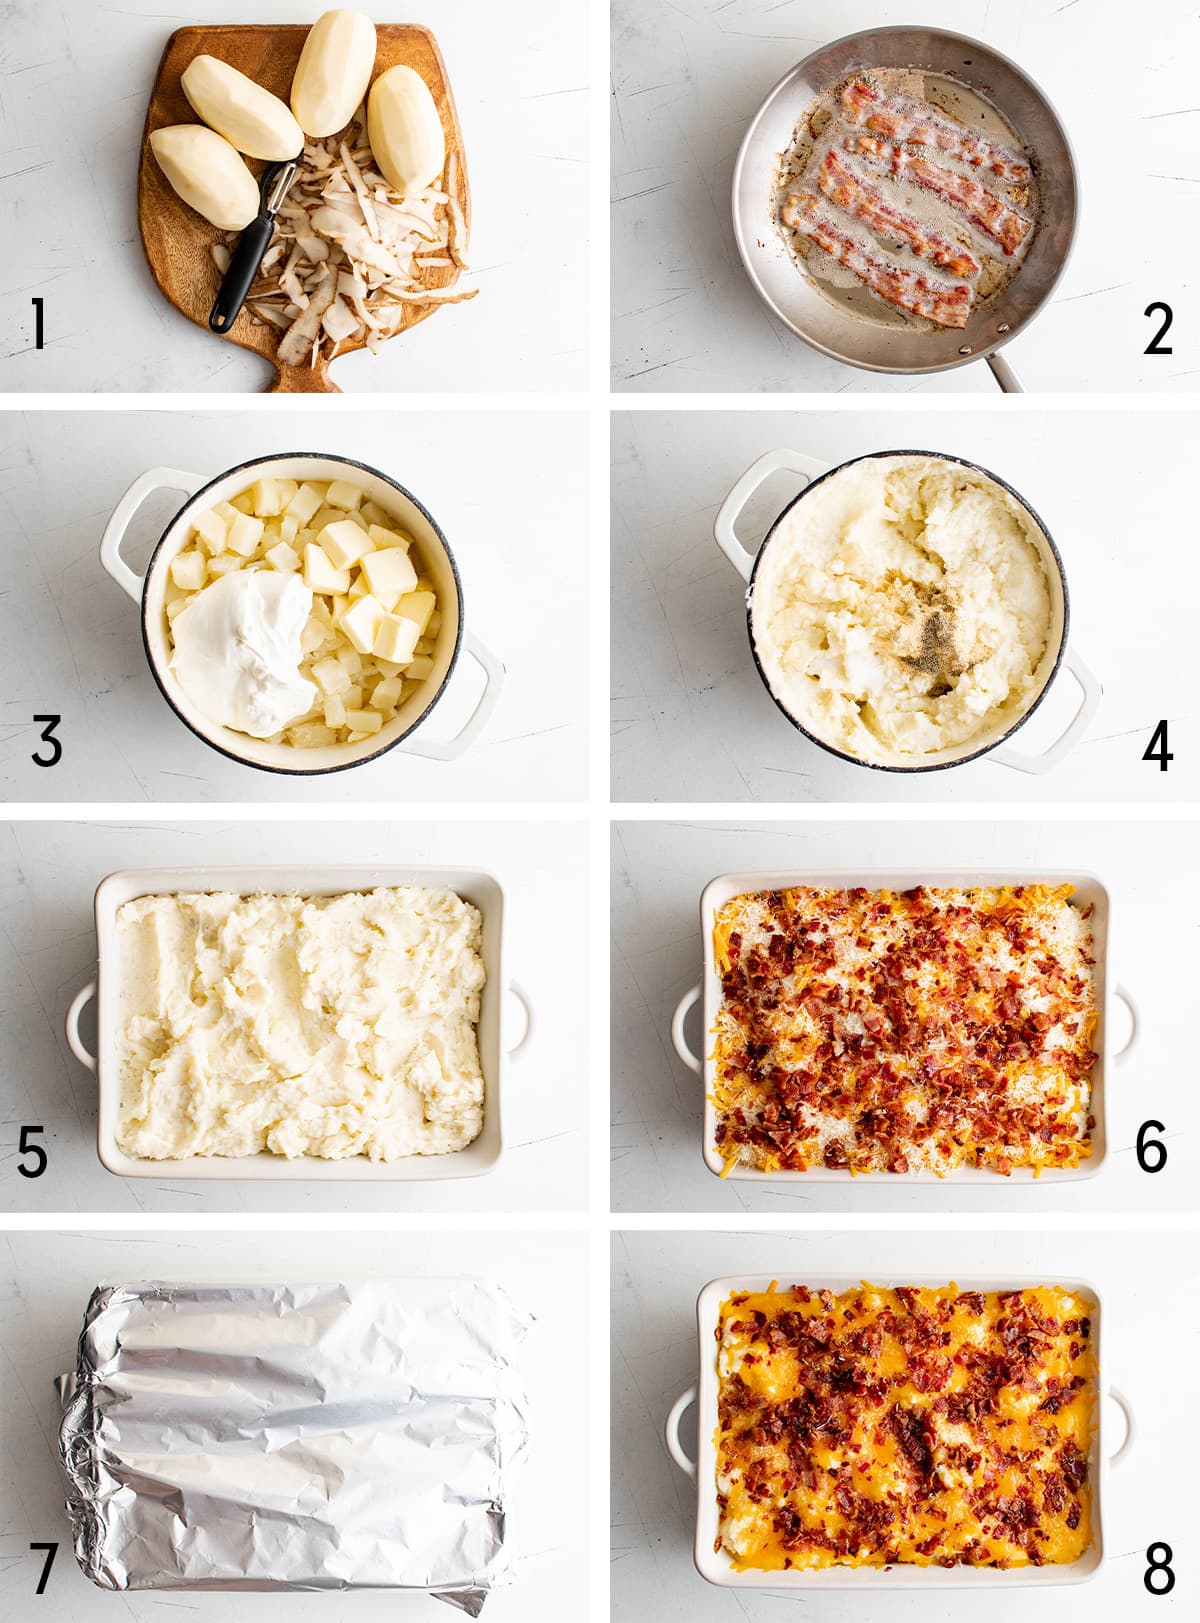 Collage of images showing how to make loaded mashed potatoes.